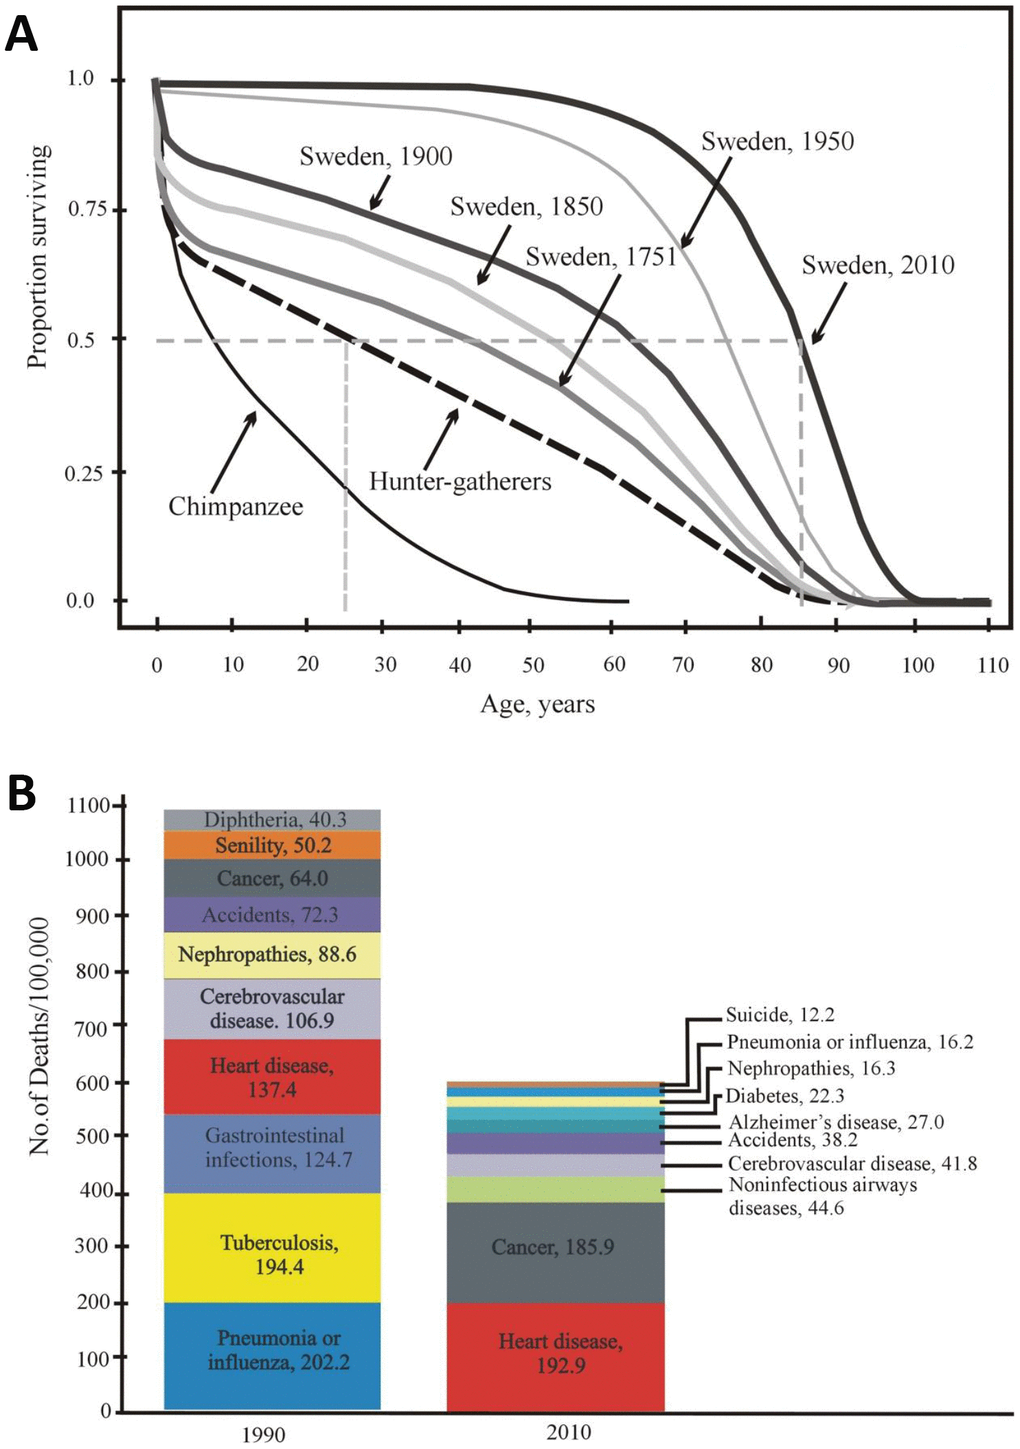 (A) Age-dependent survival of Swedish individuals (in 1751, 1850, 1900, 1950, and 2010) and of Ache Indians and chimpanzees (according to [50, 51] with modifications). (B) Mortality structure in the USA (10 main causes of death in 1900 and 2010) [52].